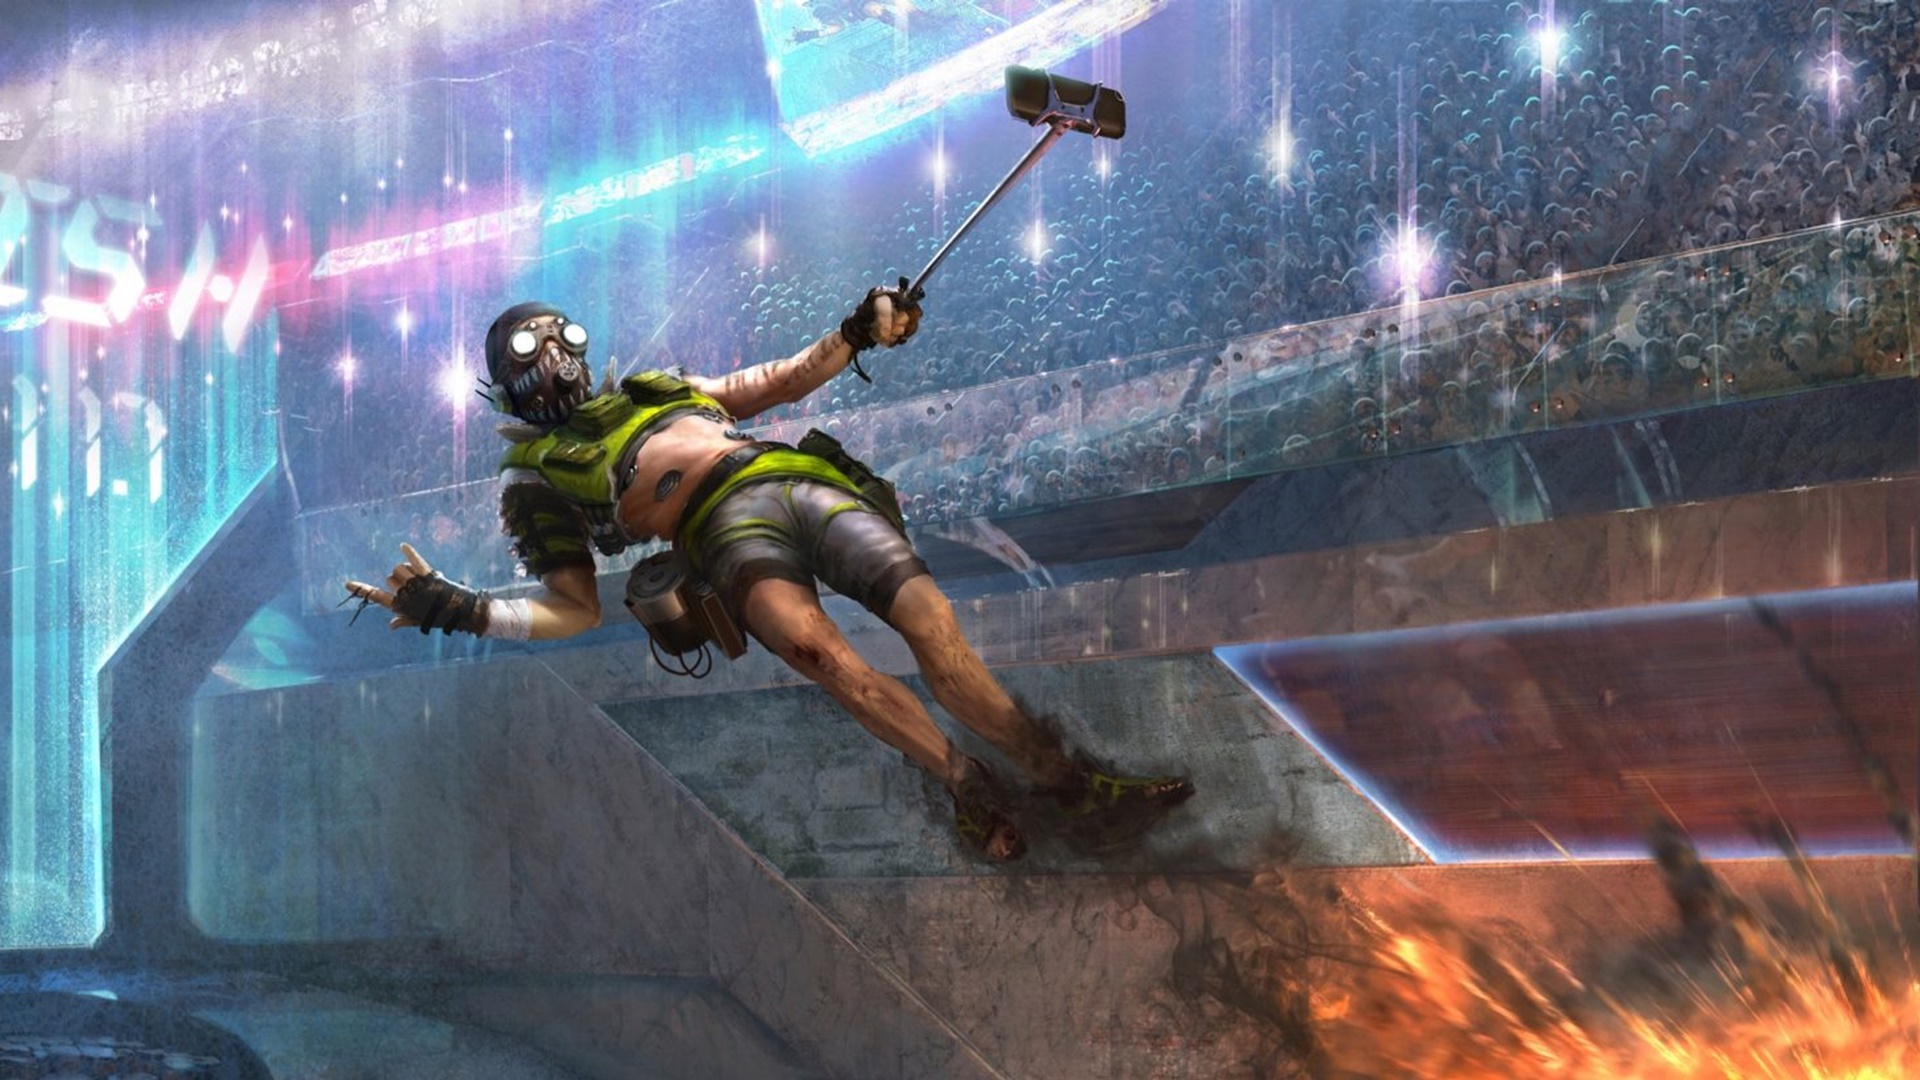 The Apex Legends supply bin bug can apparently be stored and carried around